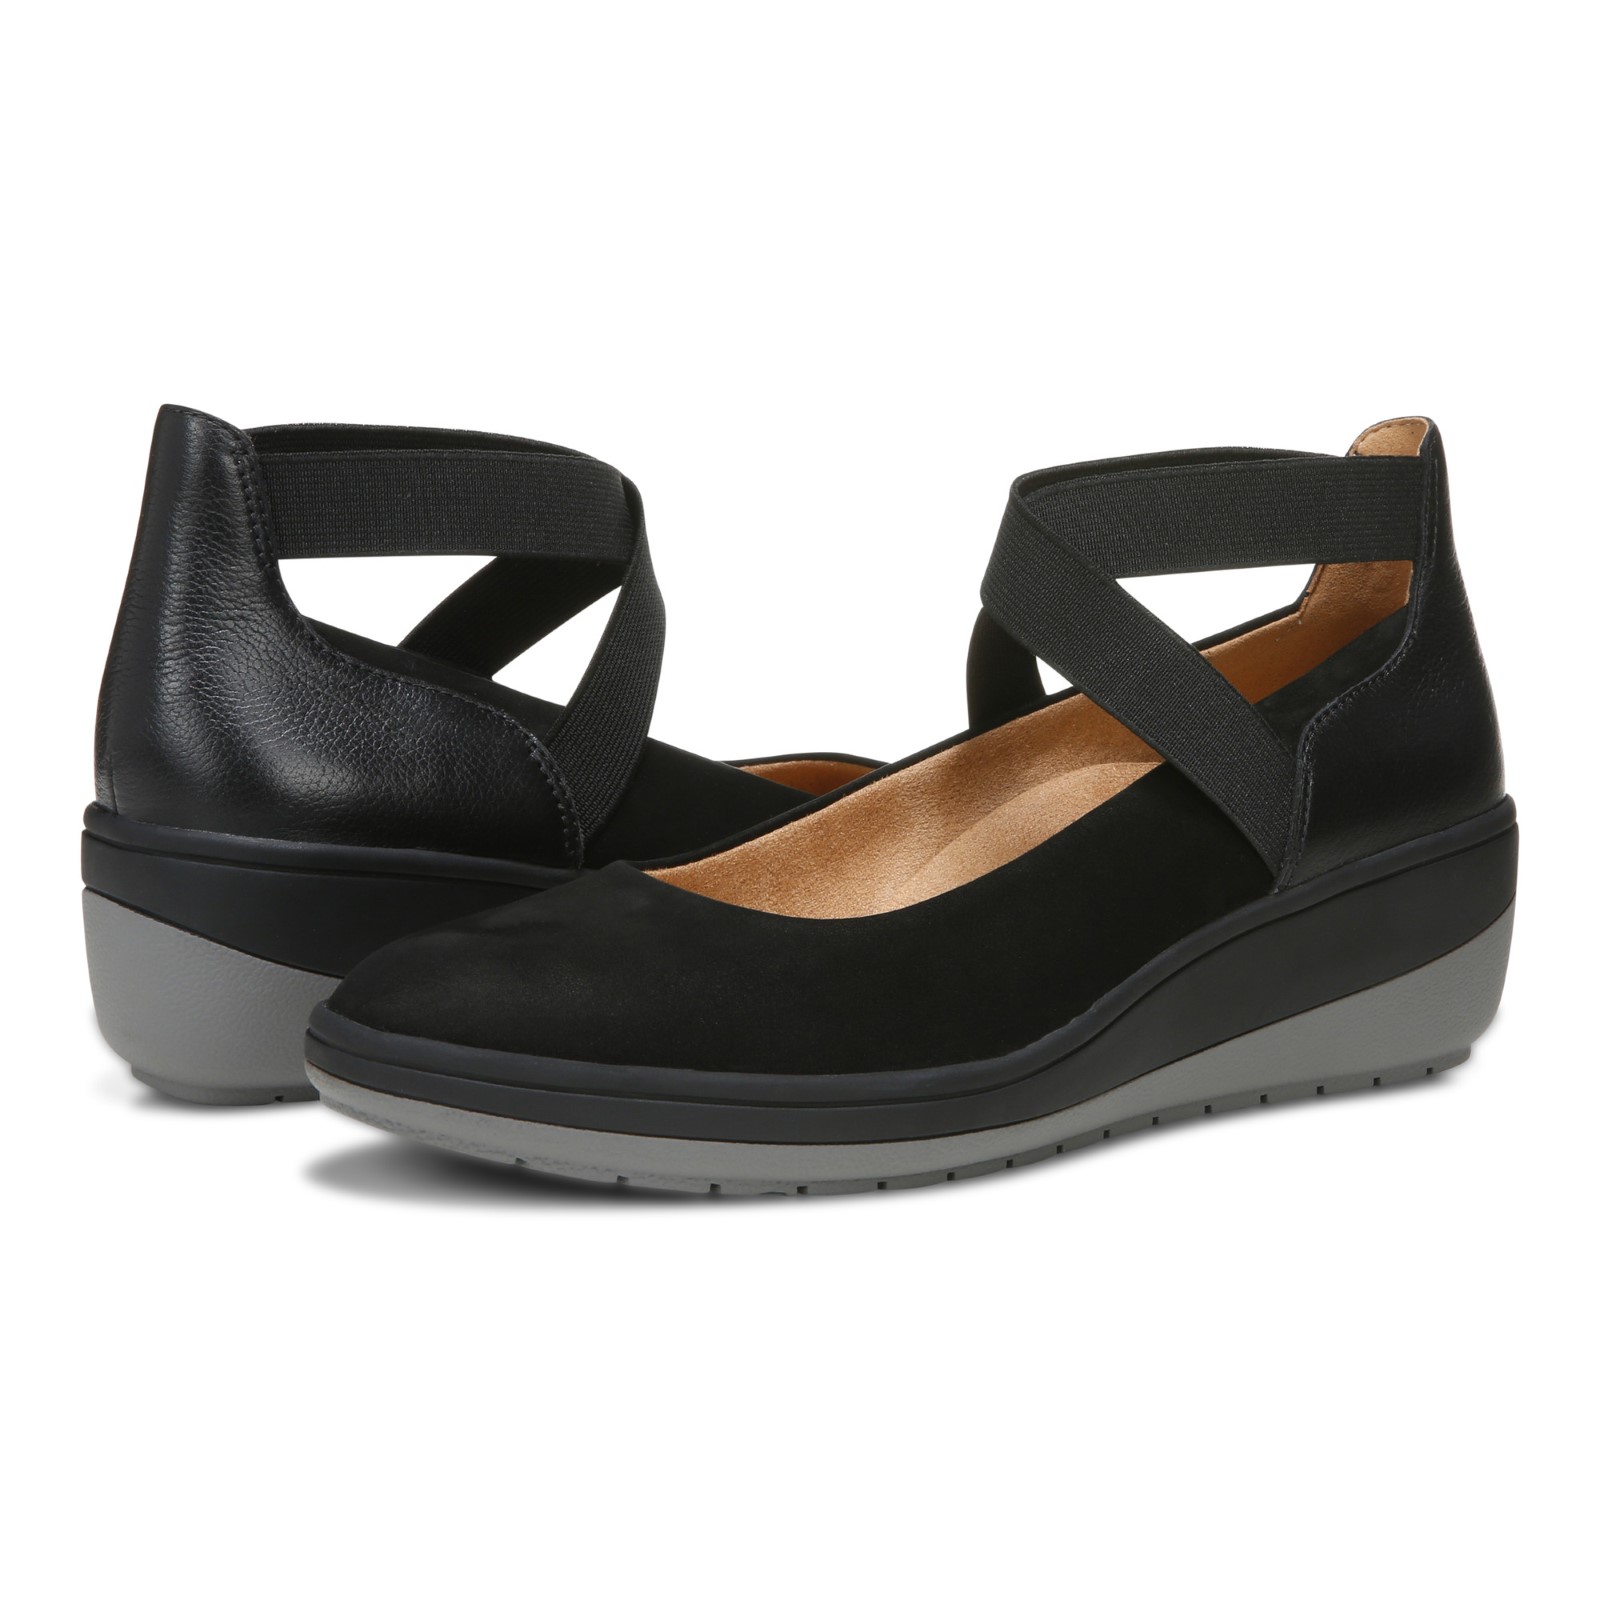 Vionic Ellery Women's Supportive Wedge - Free Shipping